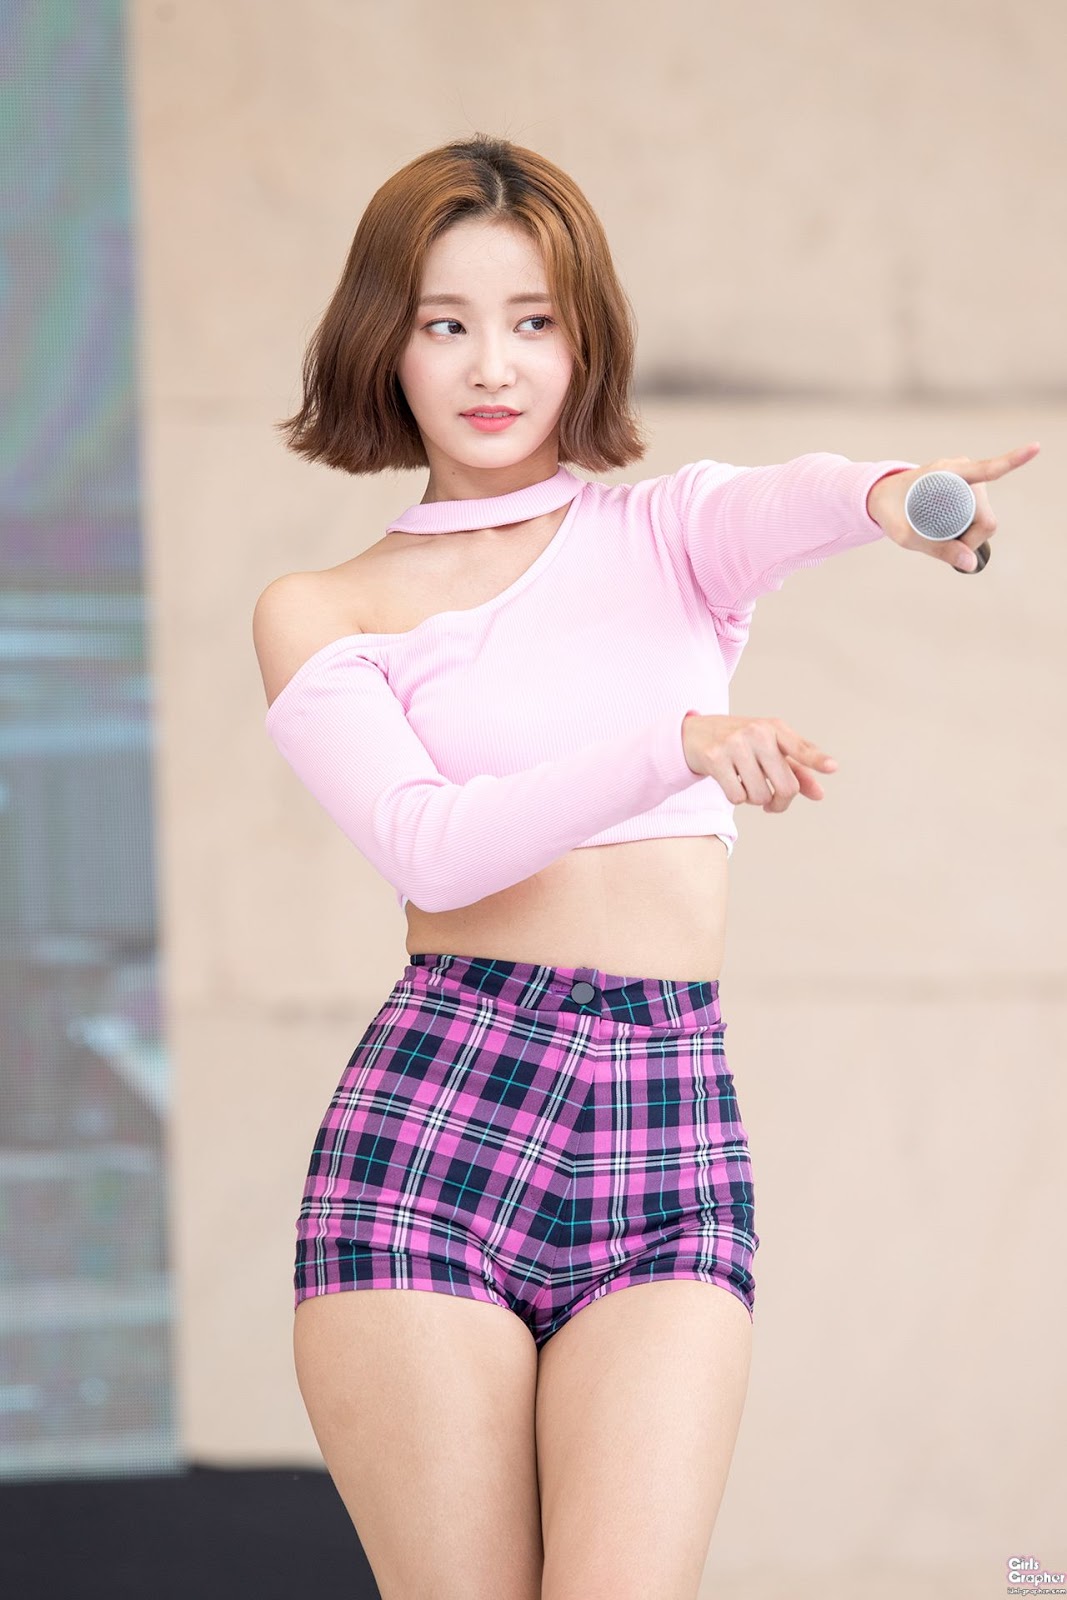 MOMOLAND Yeonwoo makes her fan cry for more photos.